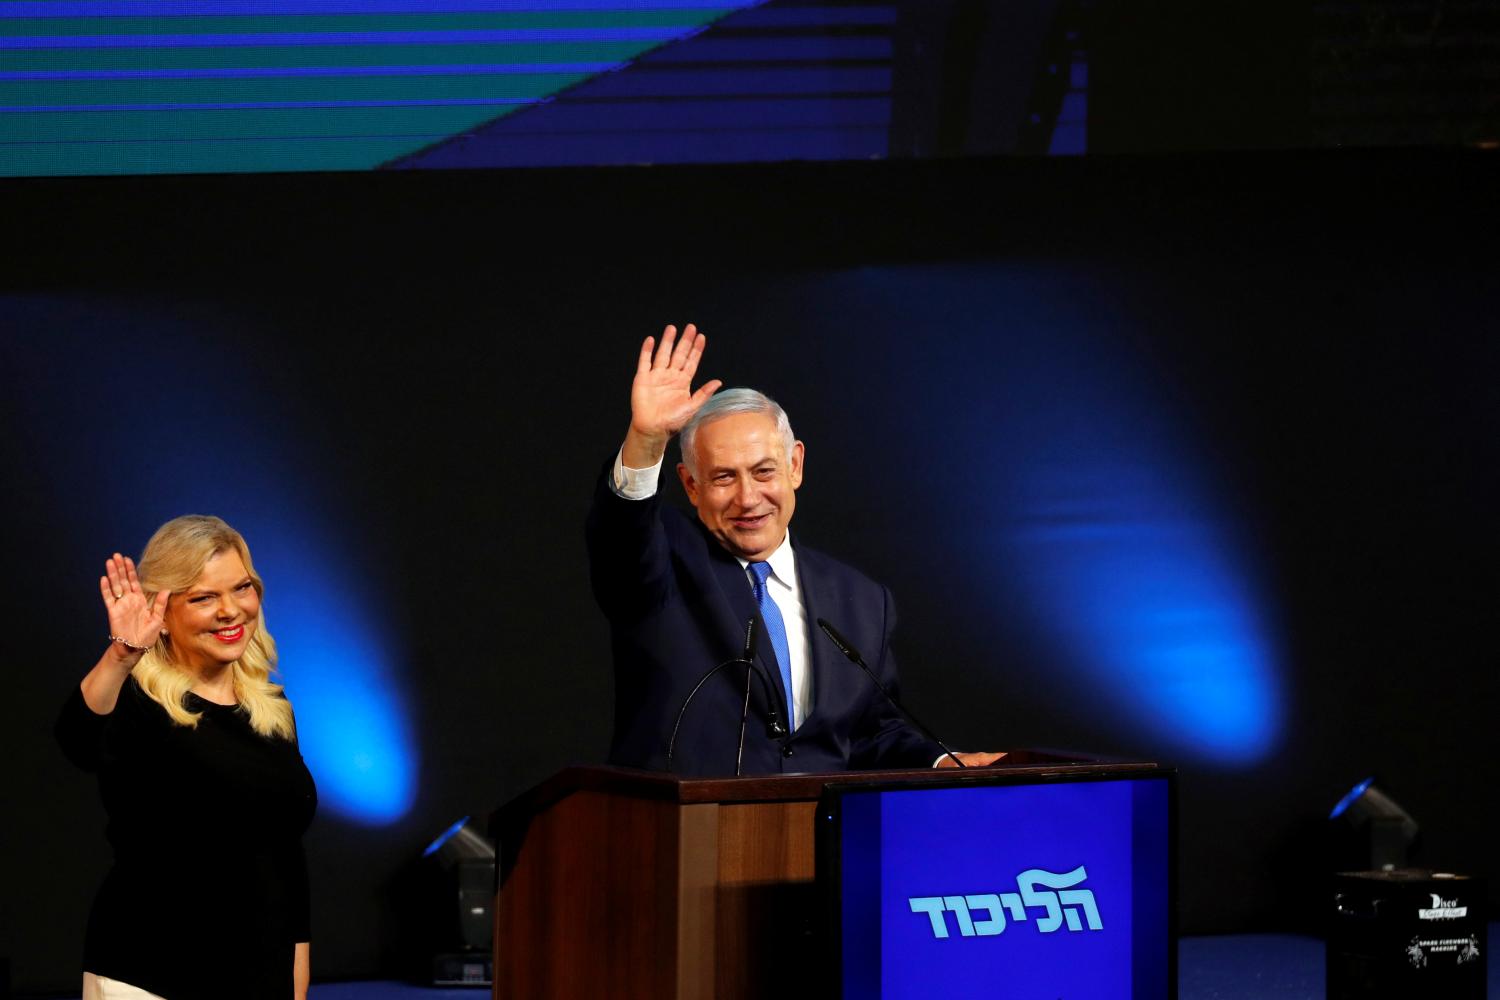 Israeli Prime Minister Benjamin Netanyahu and his wife Sara react as they stand on stage following the announcement of exit polls in Israel's parliamentary election at the party headquarters in Tel Aviv, Israel April 10, 2019. REUTERS/Ronen Zvulun - RC1262B7EBB0